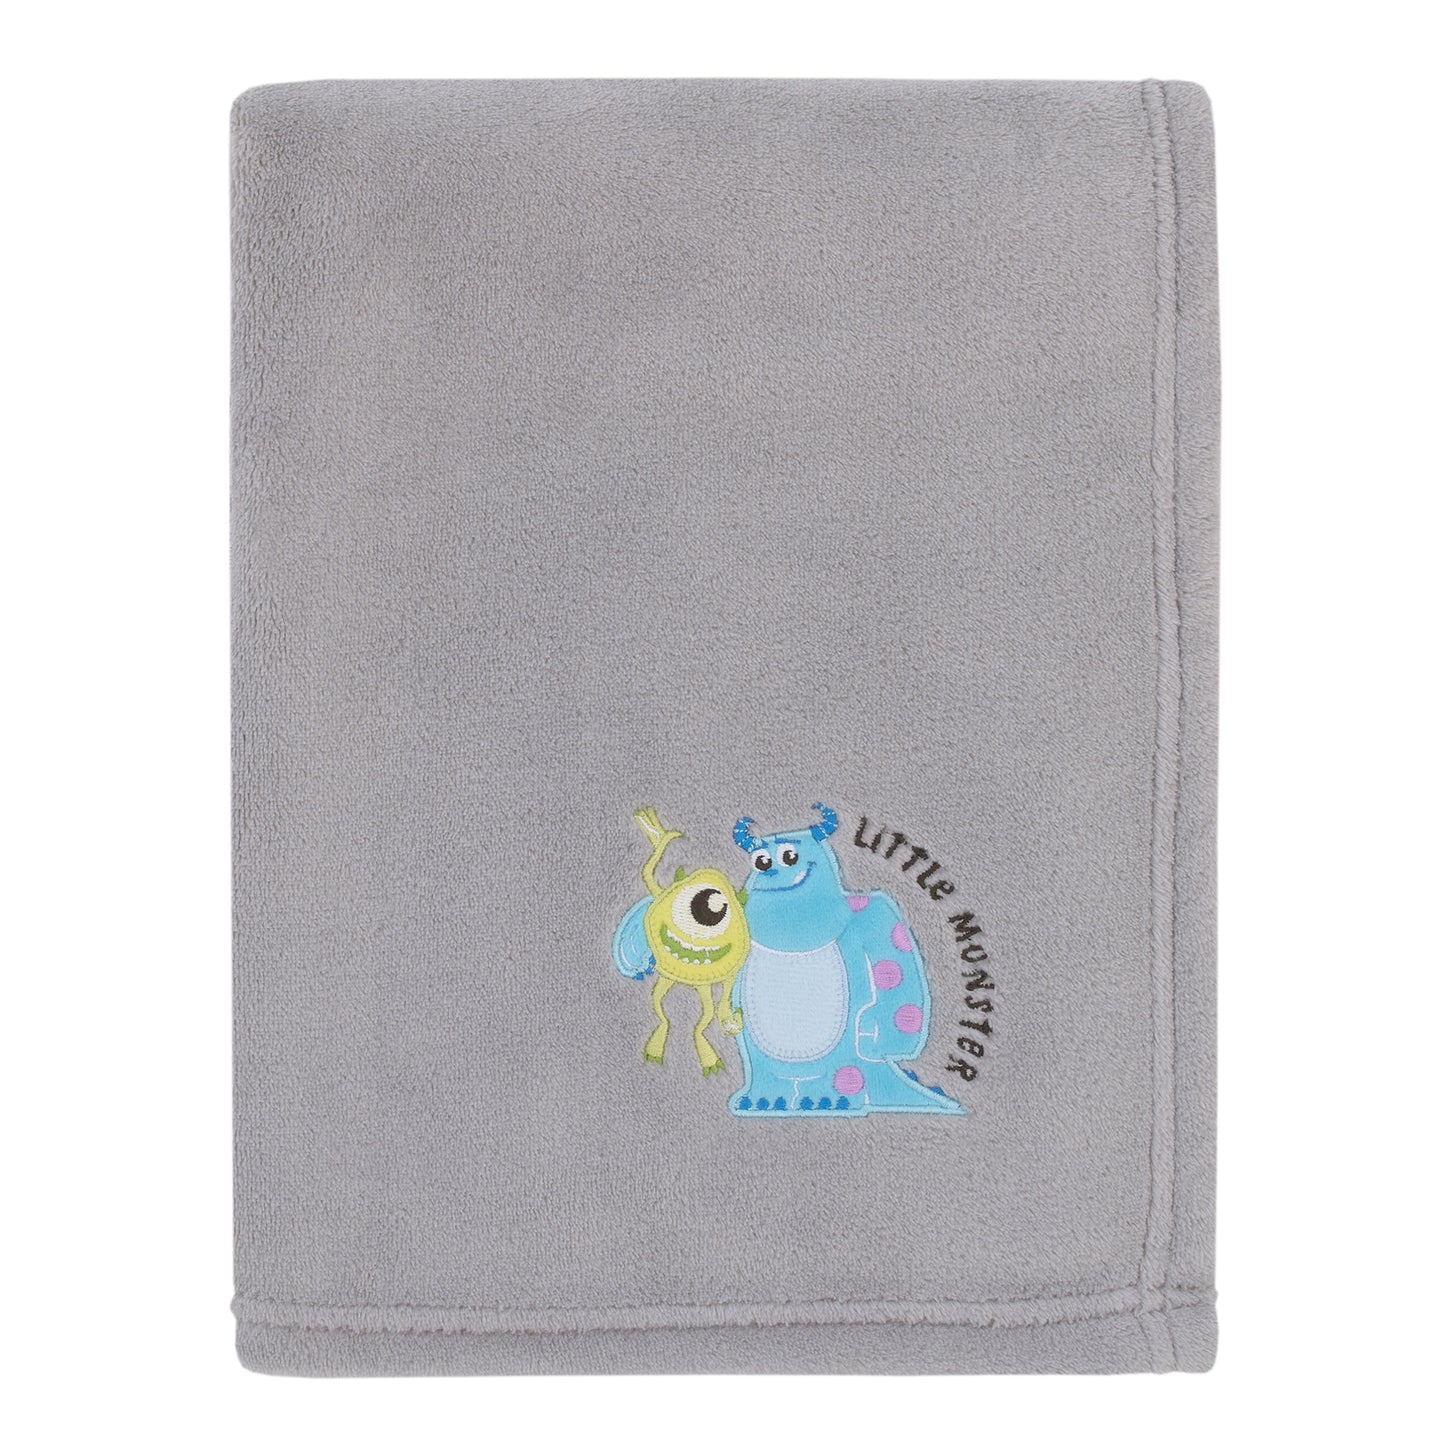 Disney Monsters, Inc. Cutest Little Monster Gray, Turquoise, and Green, Sully, and Mike Super Soft Appliqued Baby Blanket